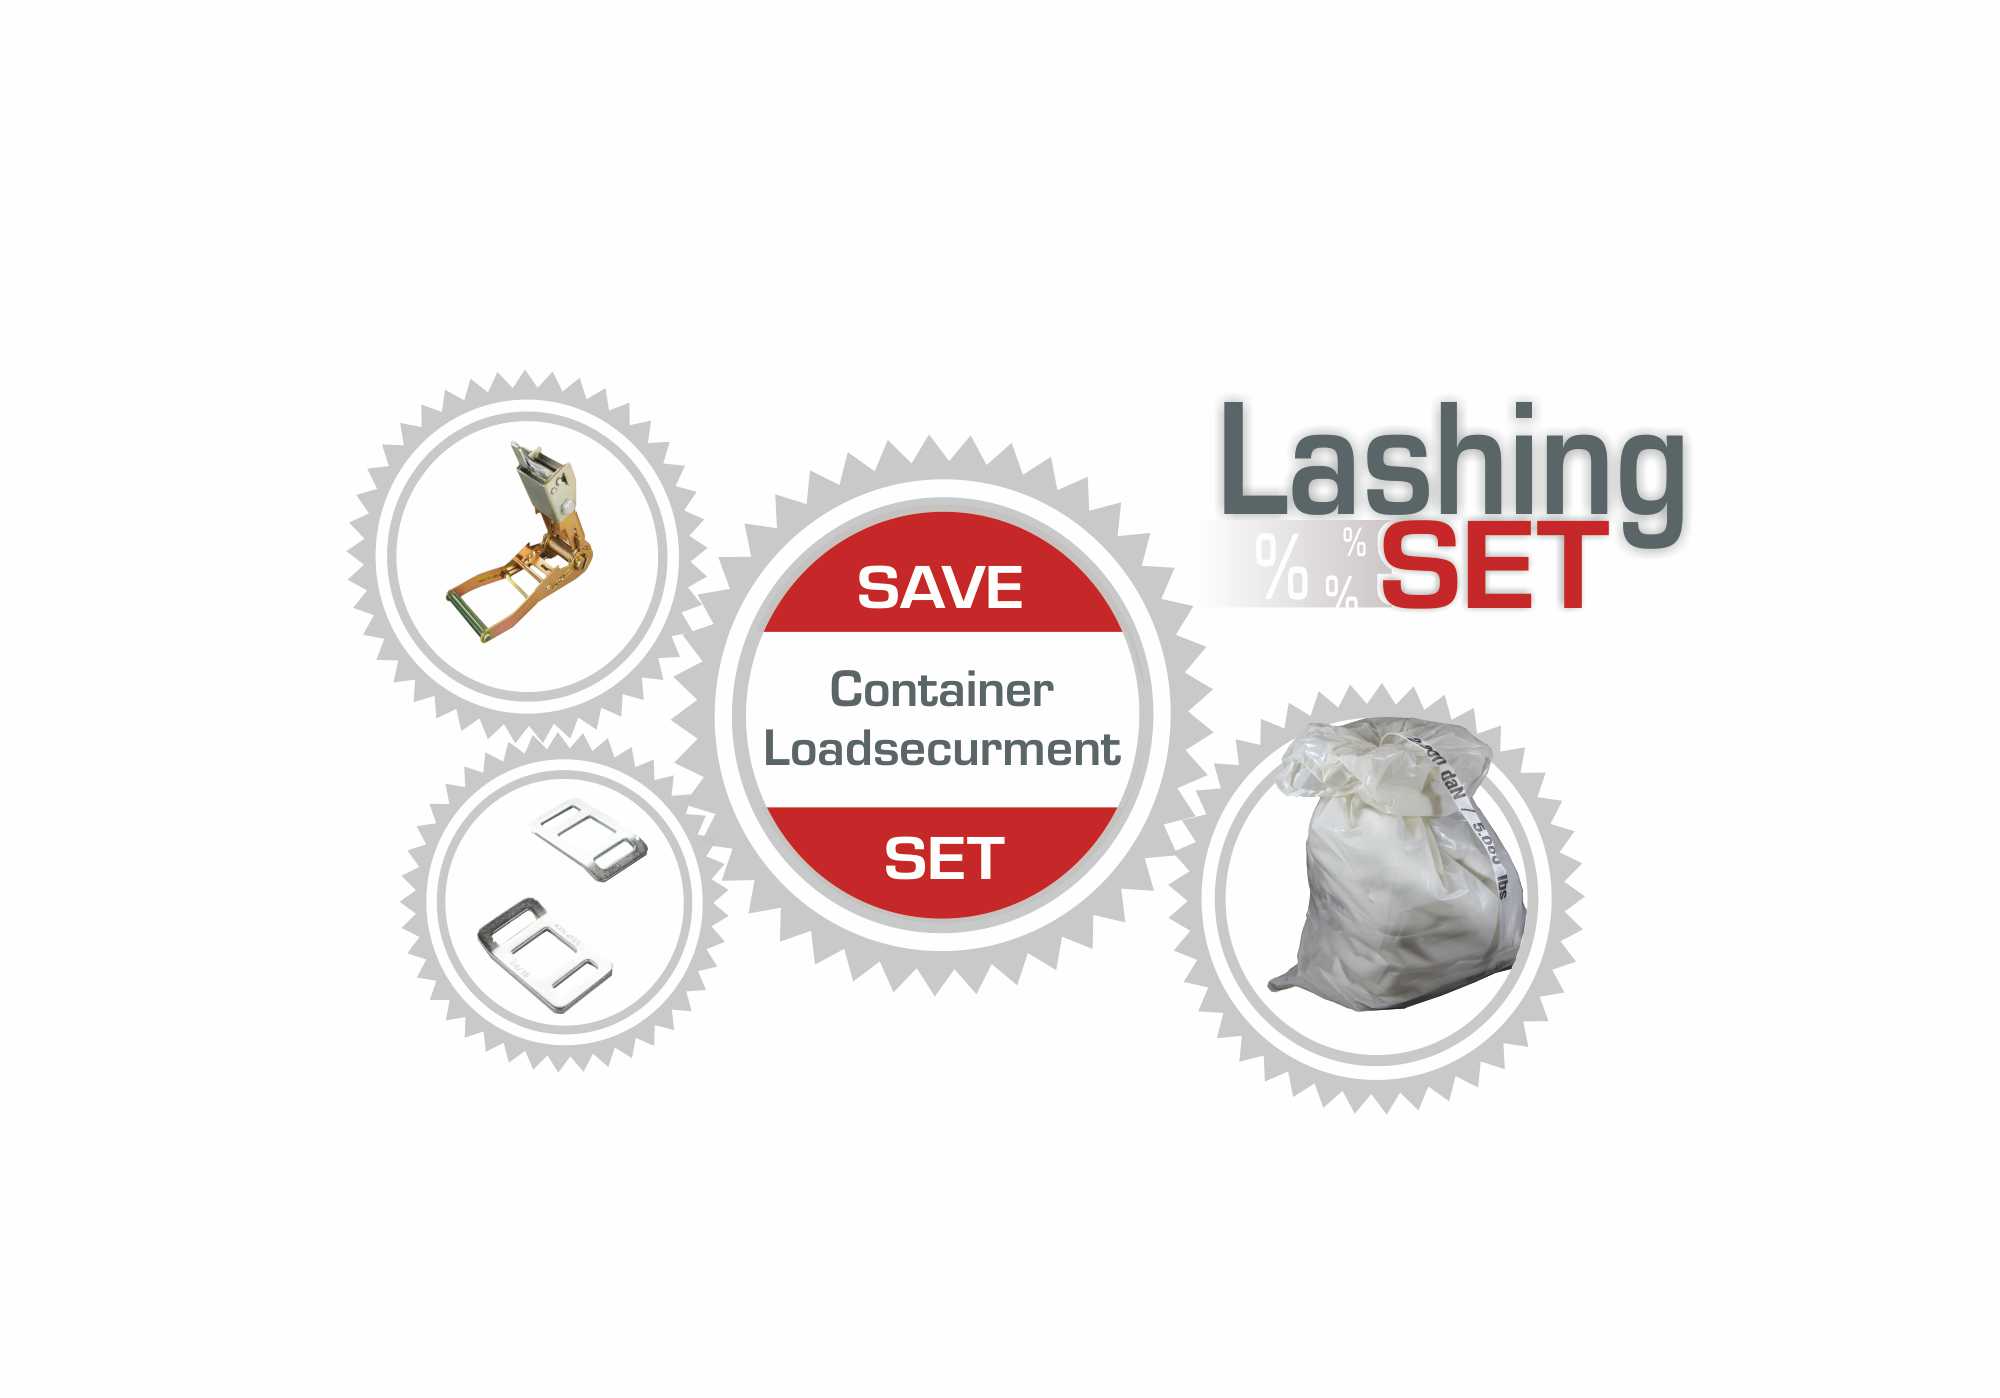 container_load_securement_save_set_2_lashing_shop_rothschenk